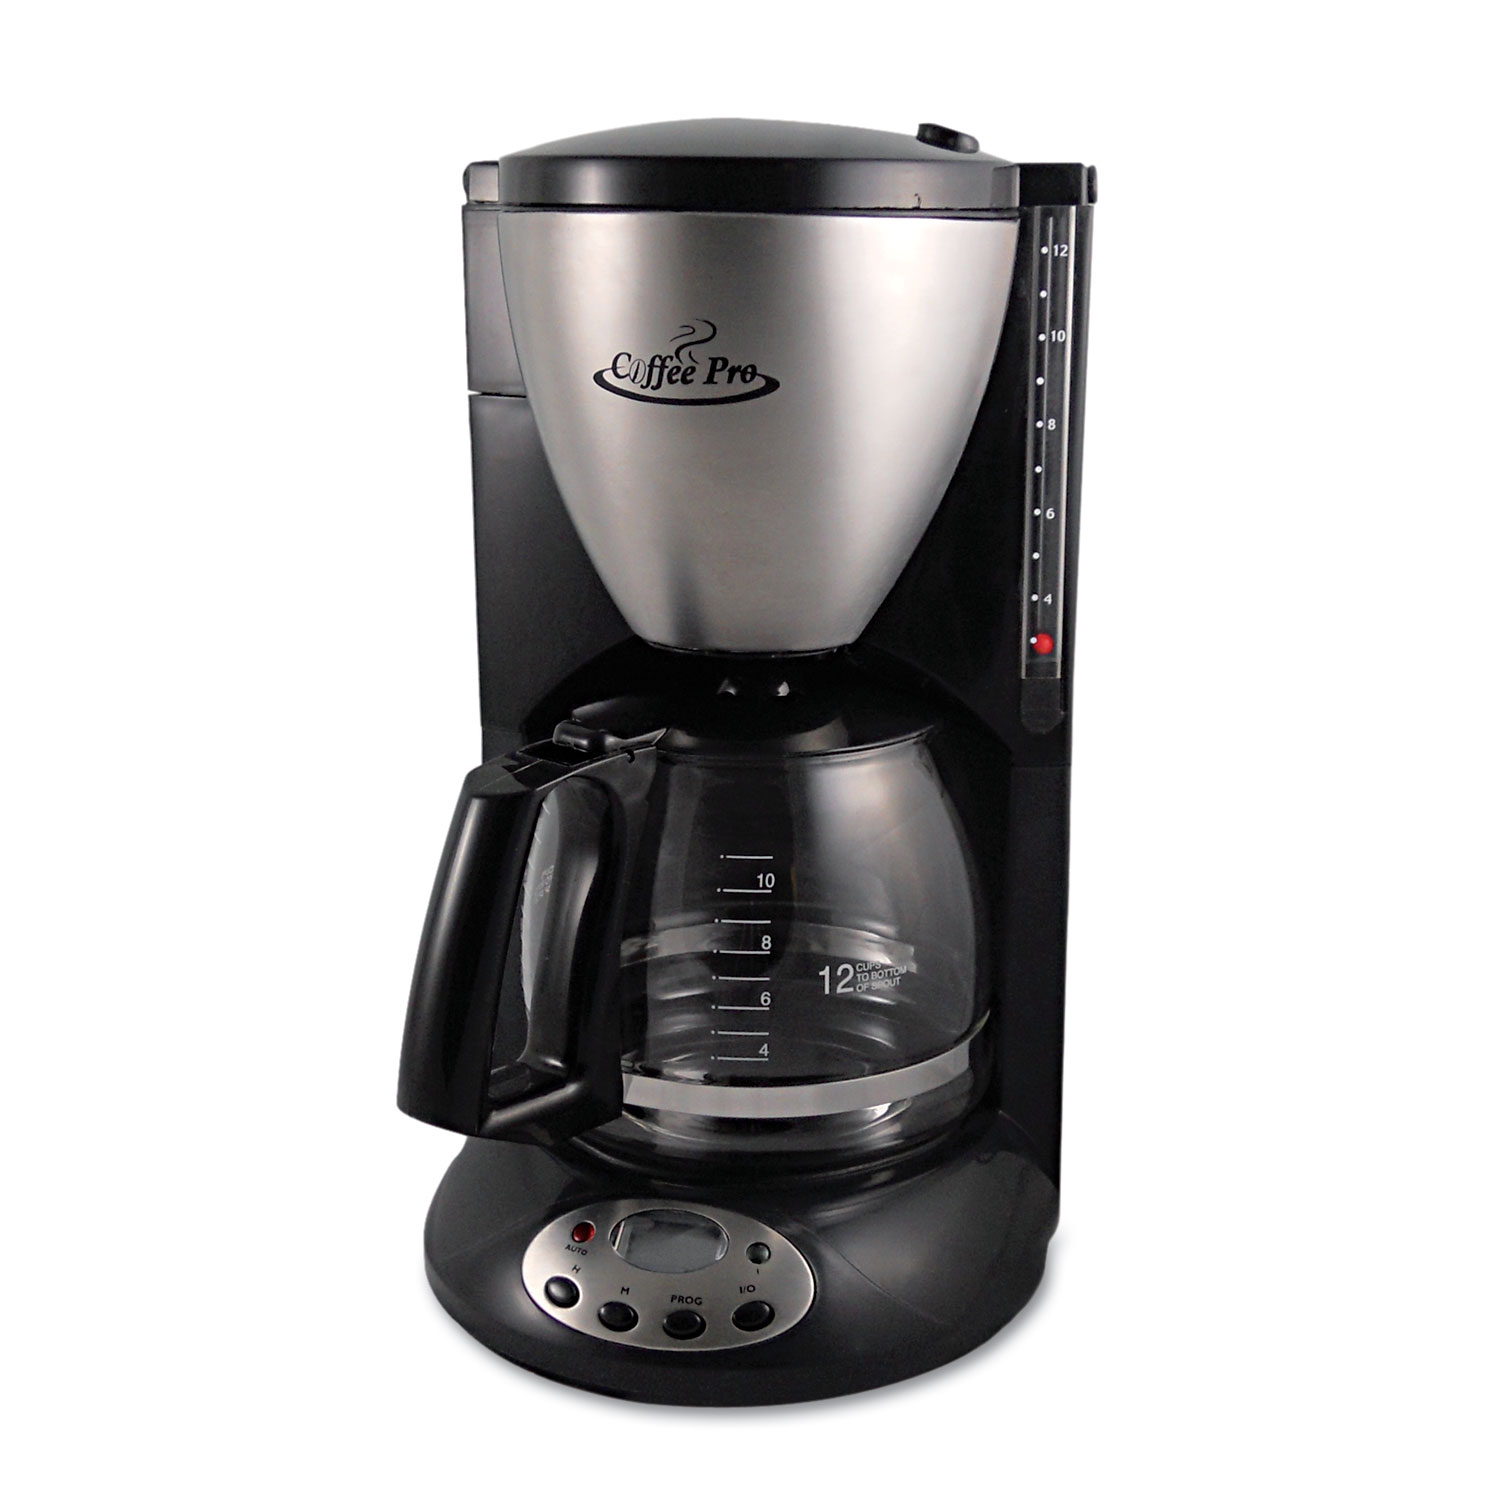 Home/Office Euro Style Coffee Maker, Black/Stainless Steel